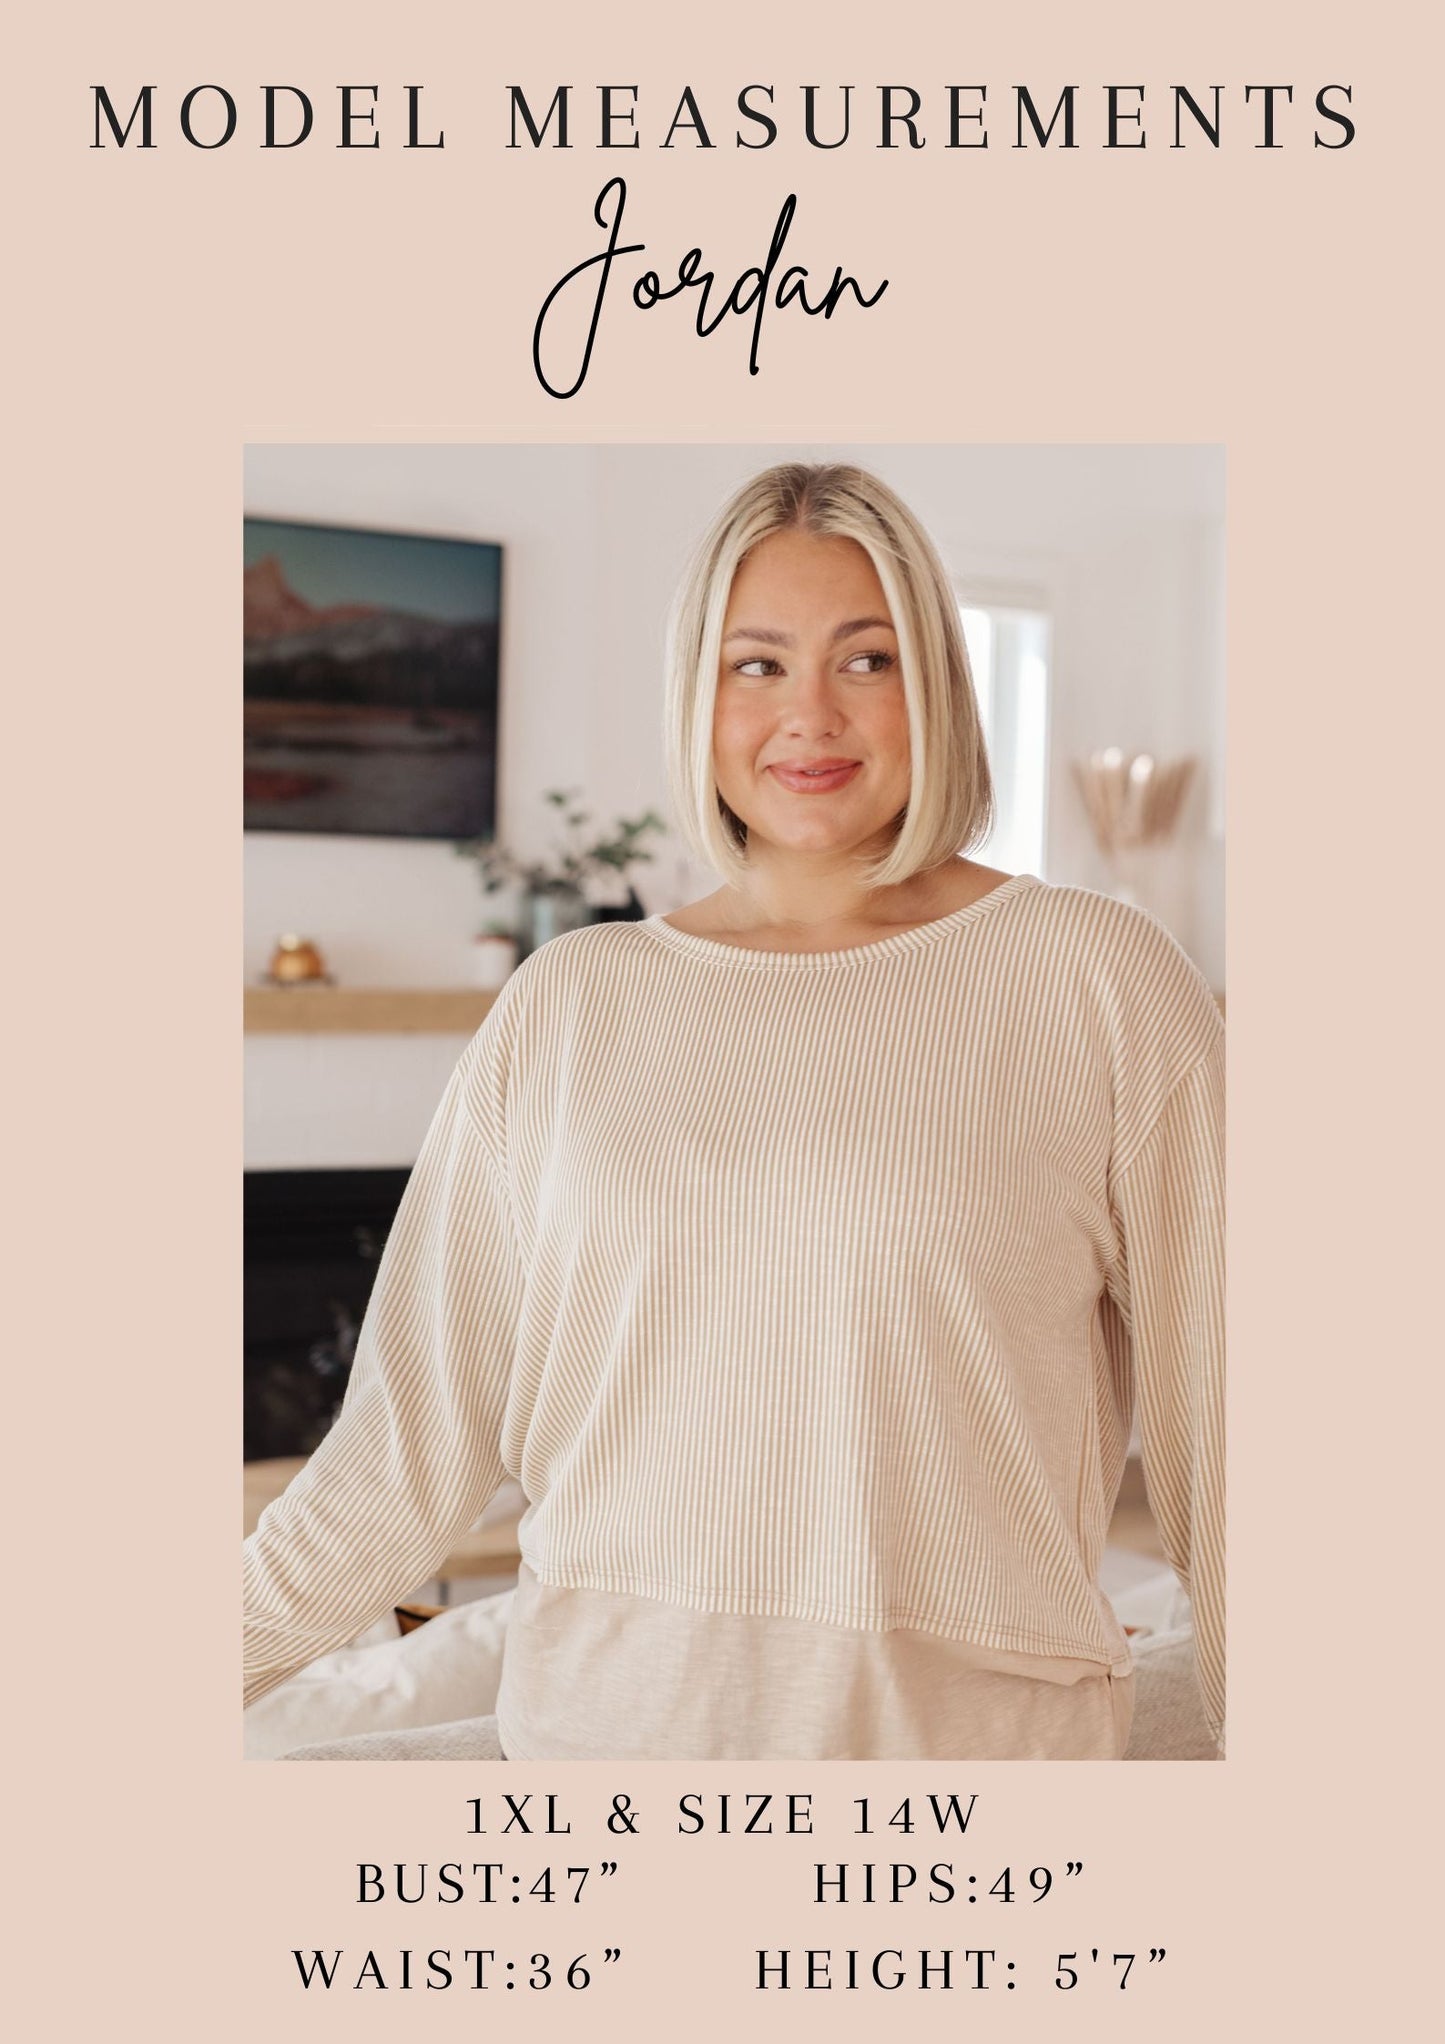 White Birch Pearl Diver Layering Top in Pink